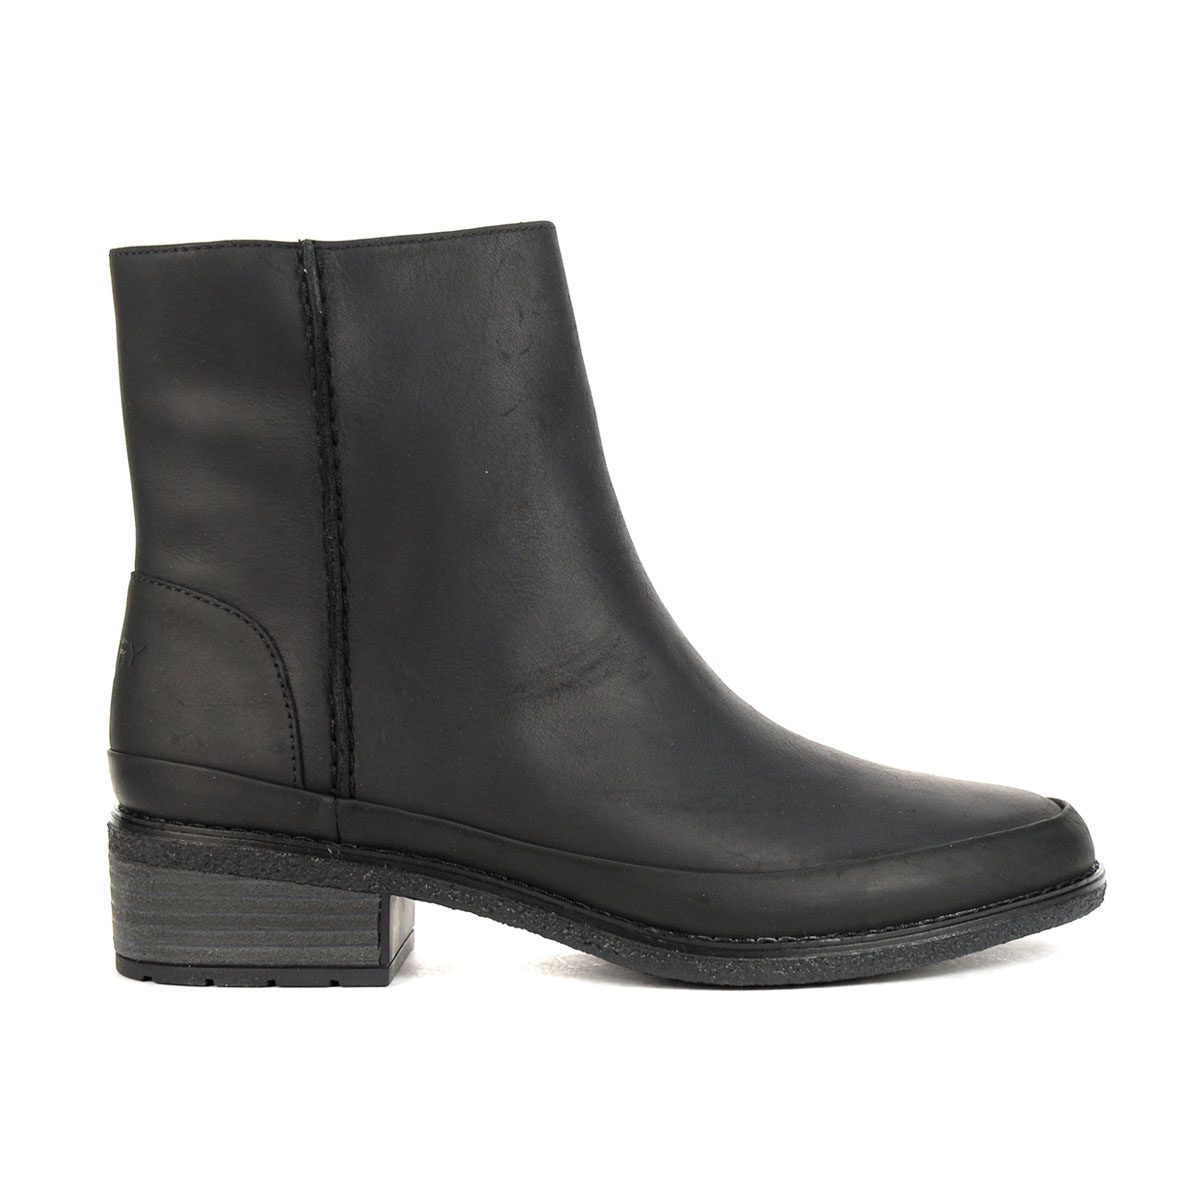 Sperry Women's Seaport Storm Black Boots STS85469 - WOOKI.COM